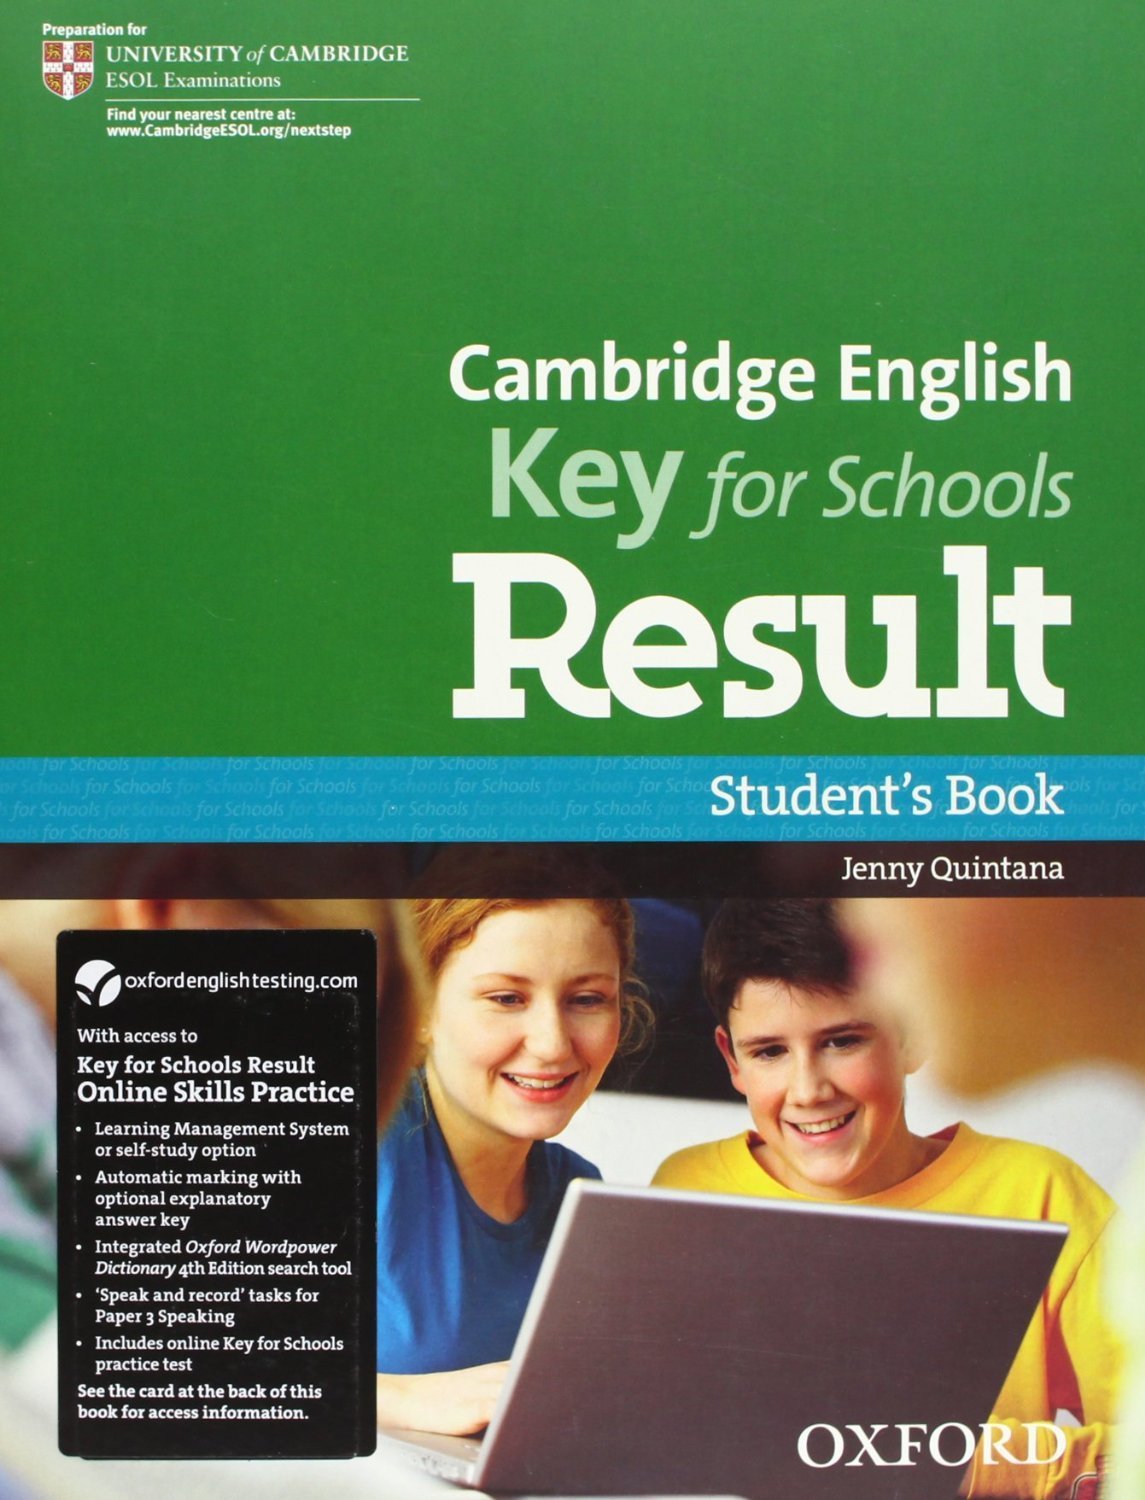 CAMBRIGE ENGLISH KEY FOR SCHOOLS RESULT Student's Book + Online Skills Practice